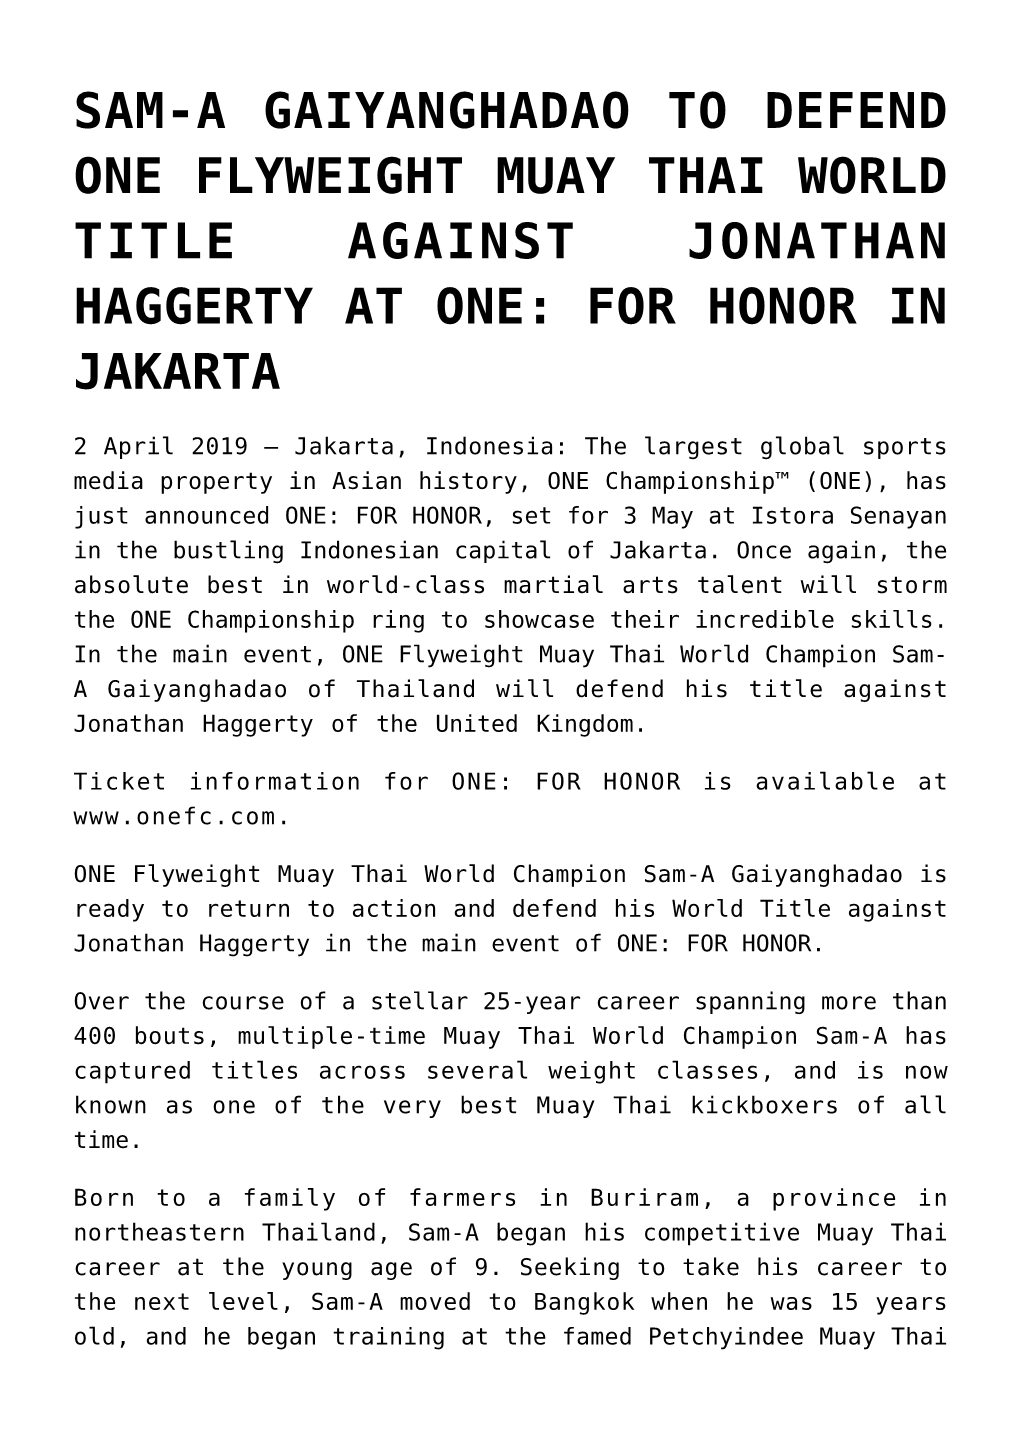 Sam-A Gaiyanghadao to Defend One Flyweight Muay Thai World Title Against Jonathan Haggerty at One: for Honor in Jakarta